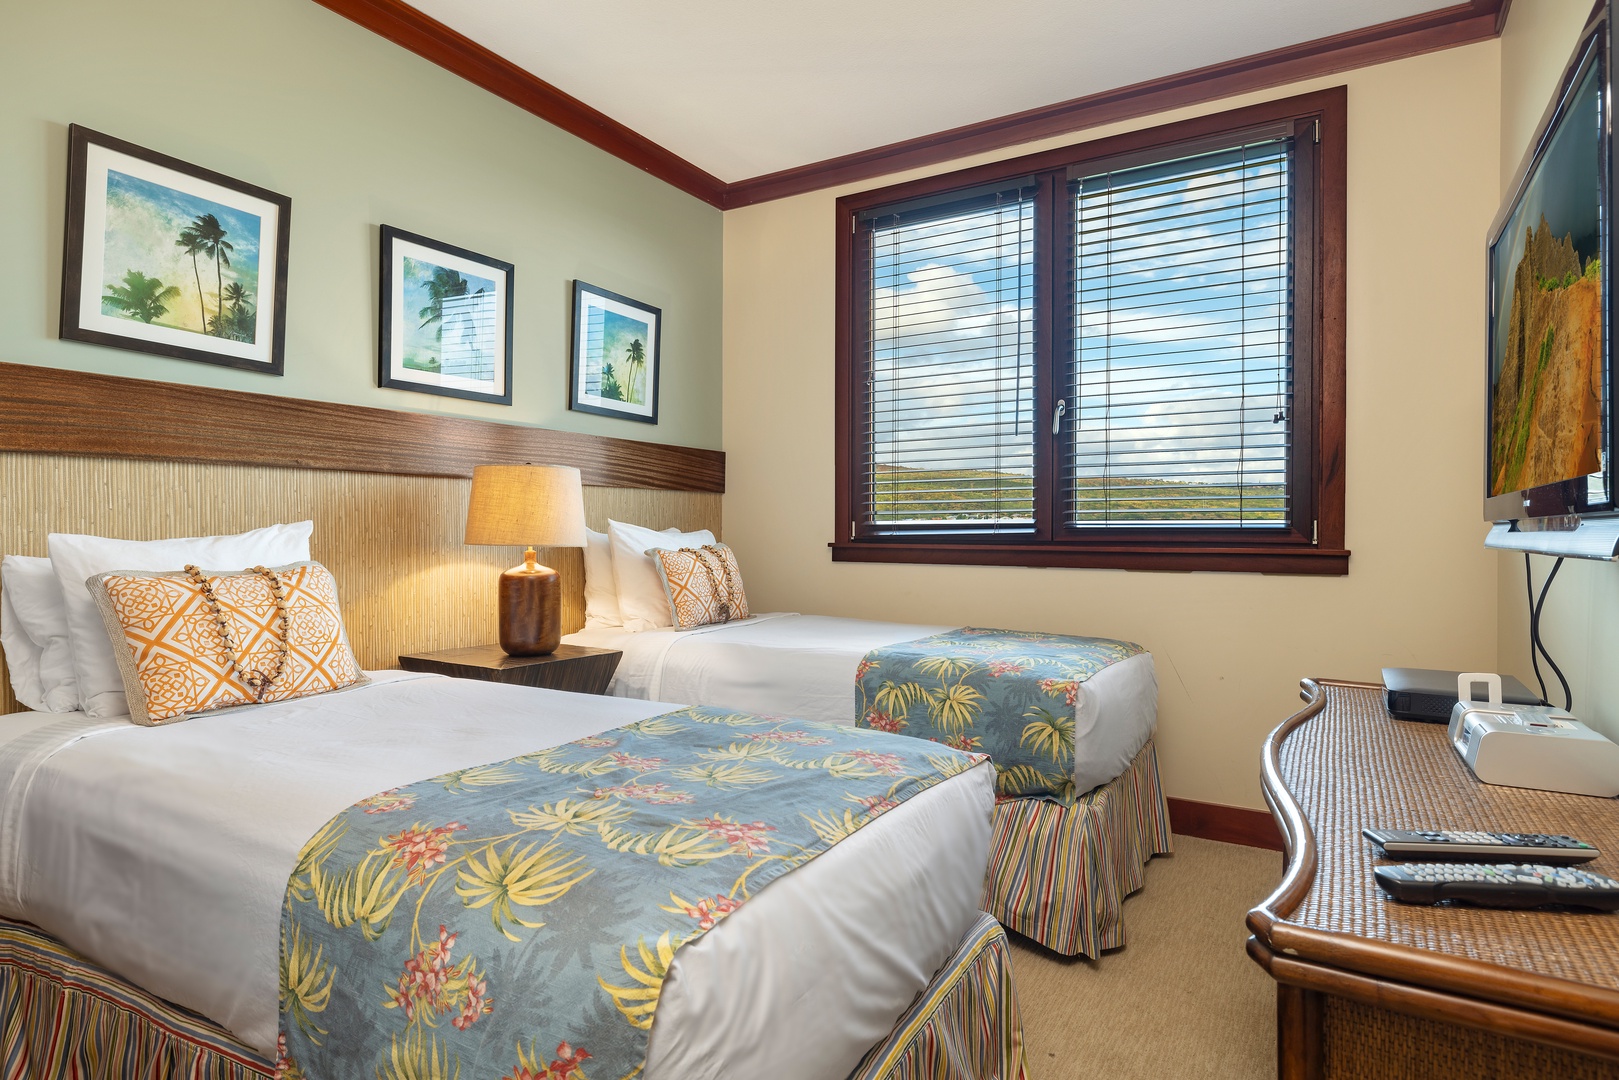 Kapolei Vacation Rentals, Ko Olina Beach Villas O1006 - The second guest bedroom with twin beds and a view.